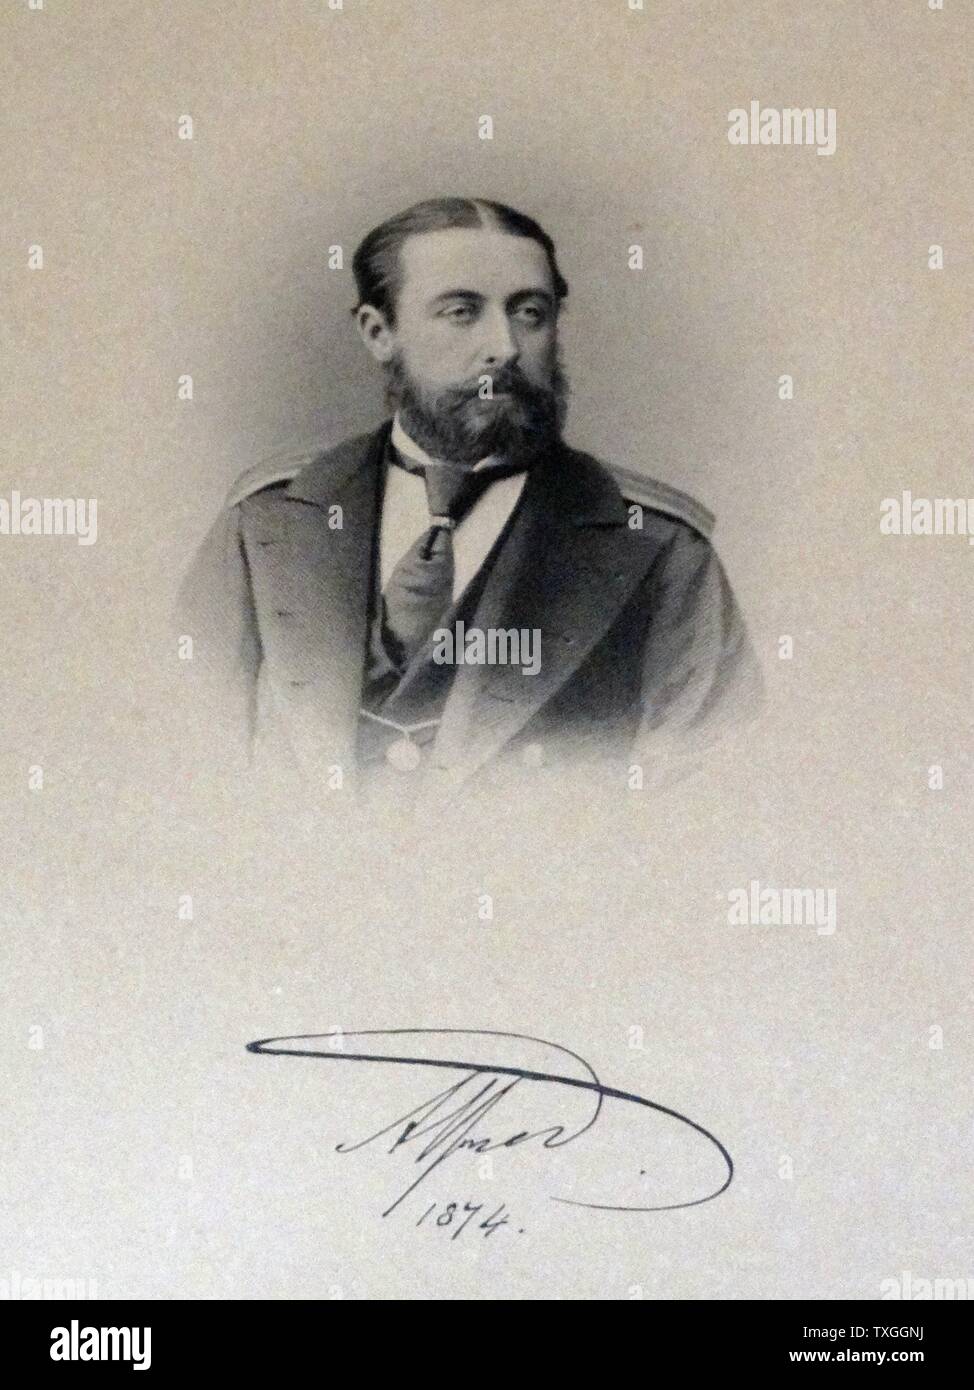 Edward VII (Albert Edward 1841 ñ1910) photographed in 1874 with his signature. King of the United Kingdom and the British Dominions and Emperor of India from 22 January 1901 until his death. Stock Photo